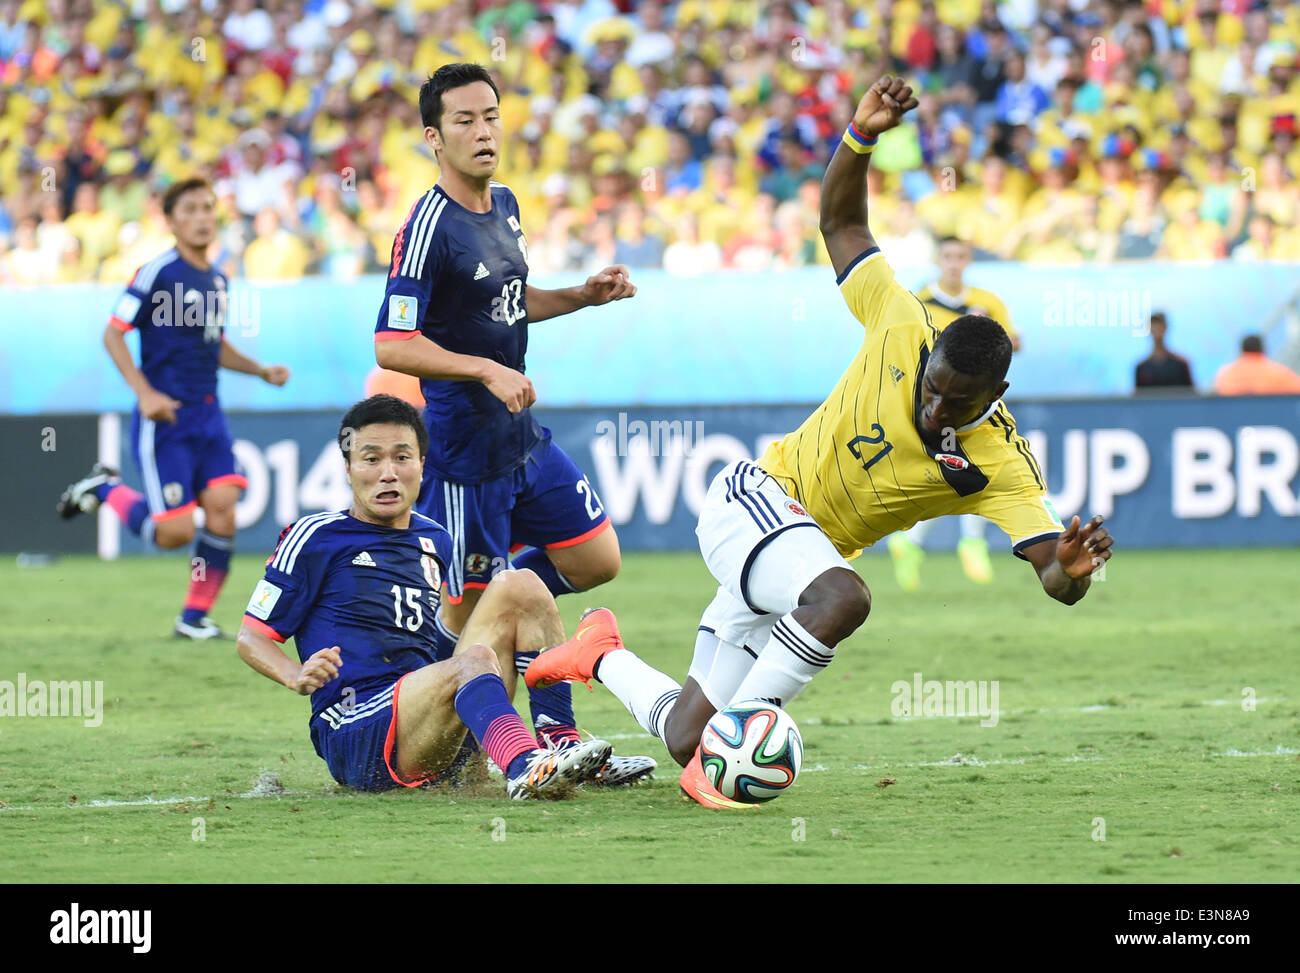 Cuiaba, Brazil. 24th June, 2014. Colombia's Jackson Martinez falls down during a Group C match between Japan and Colombia of 2014 FIFA World Cup at the Arena Pantanal Stadium in Cuiaba, Brazil, June 24, 2014. © Liu Dawei/Xinhua/Alamy Live News Stock Photo